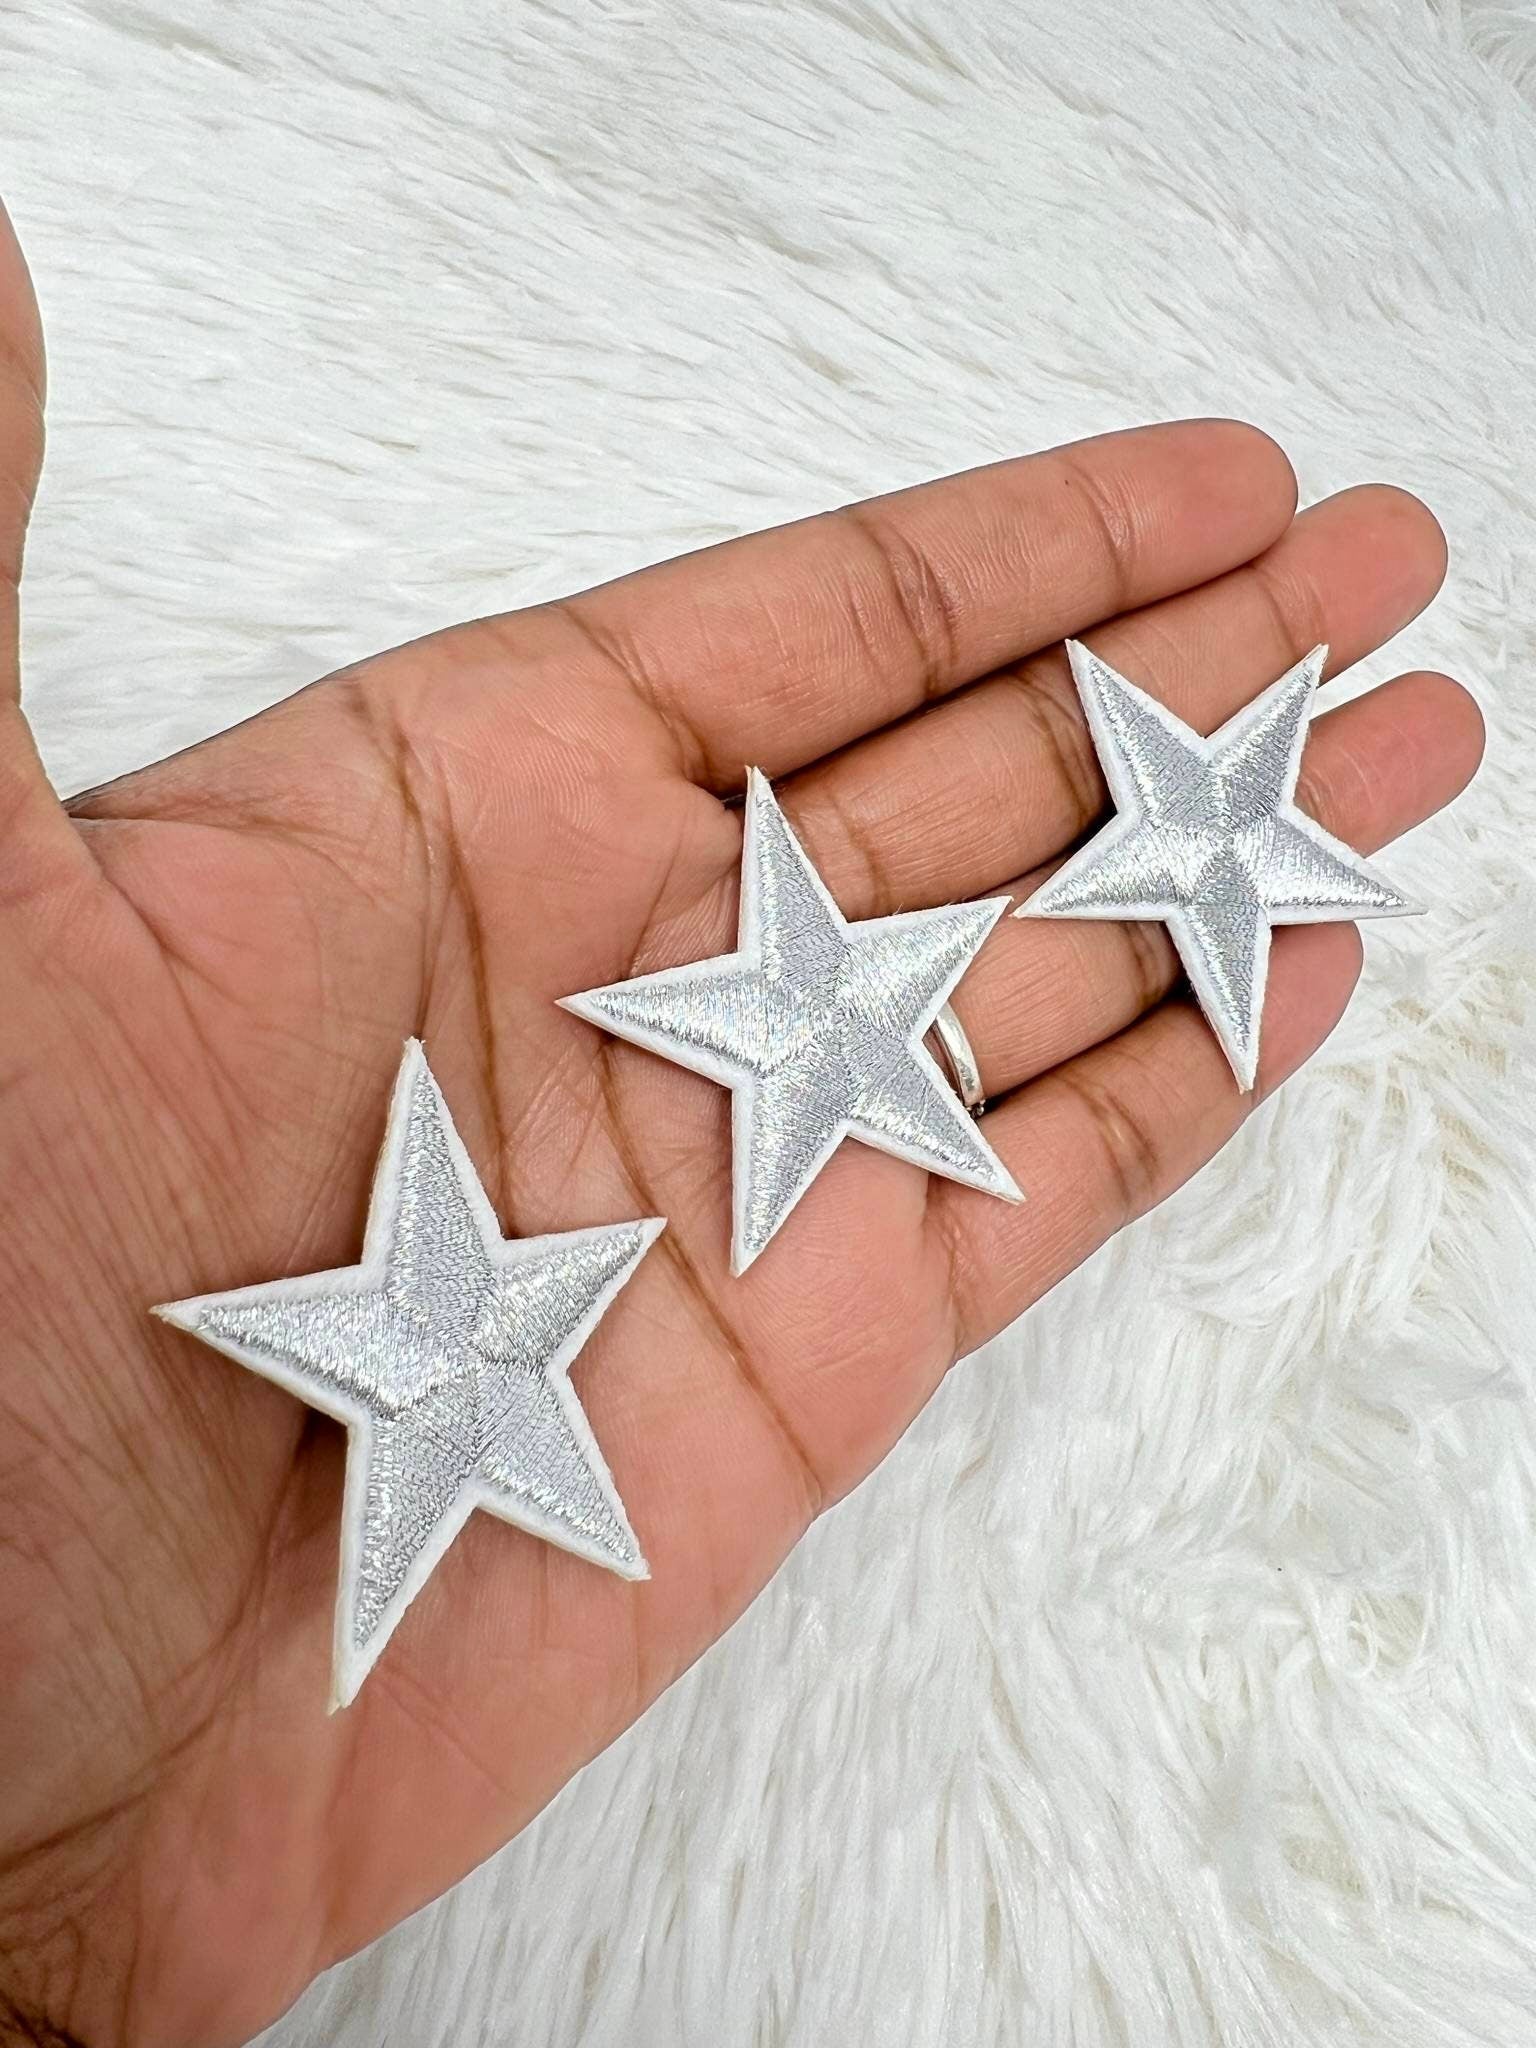 99 Pieces Star Iron on Patches Mini Star Patches Star Embroidered Patches  Small DIY Sewing Star Patches Colorful Sew Star Appliques for Clothing Bags